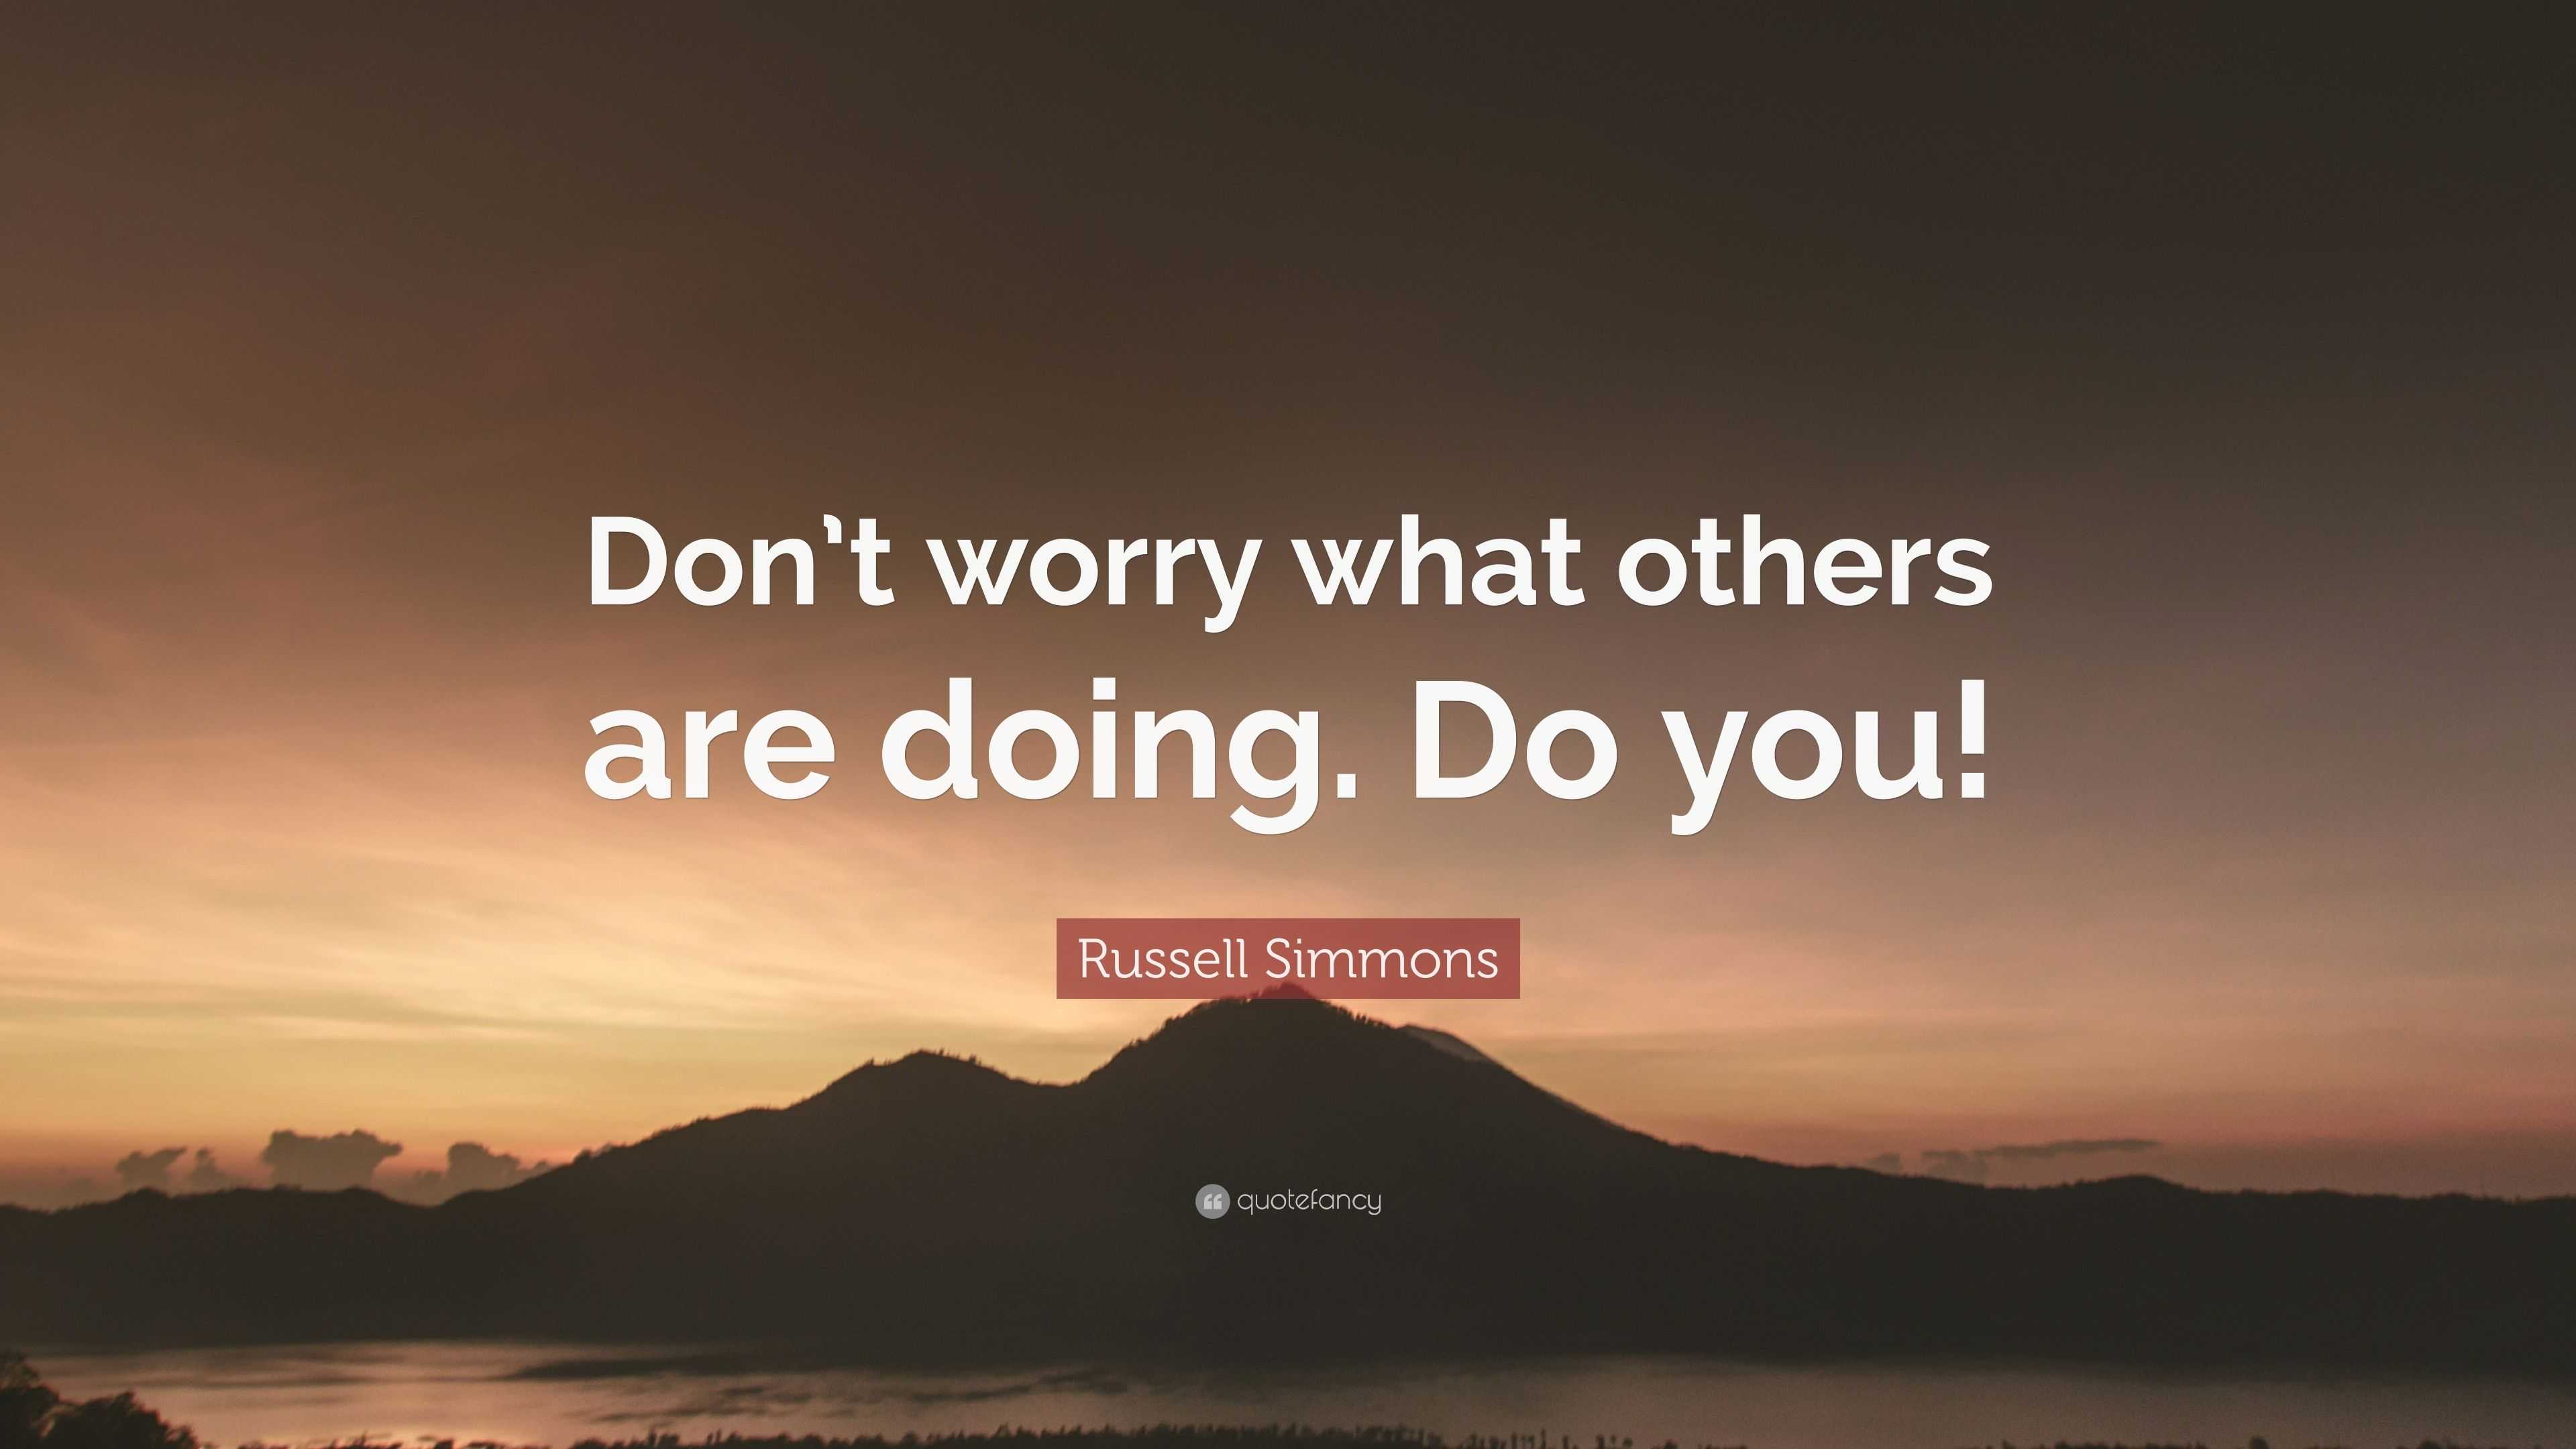 Russell Simmons Quote “Don’t worry what others are doing